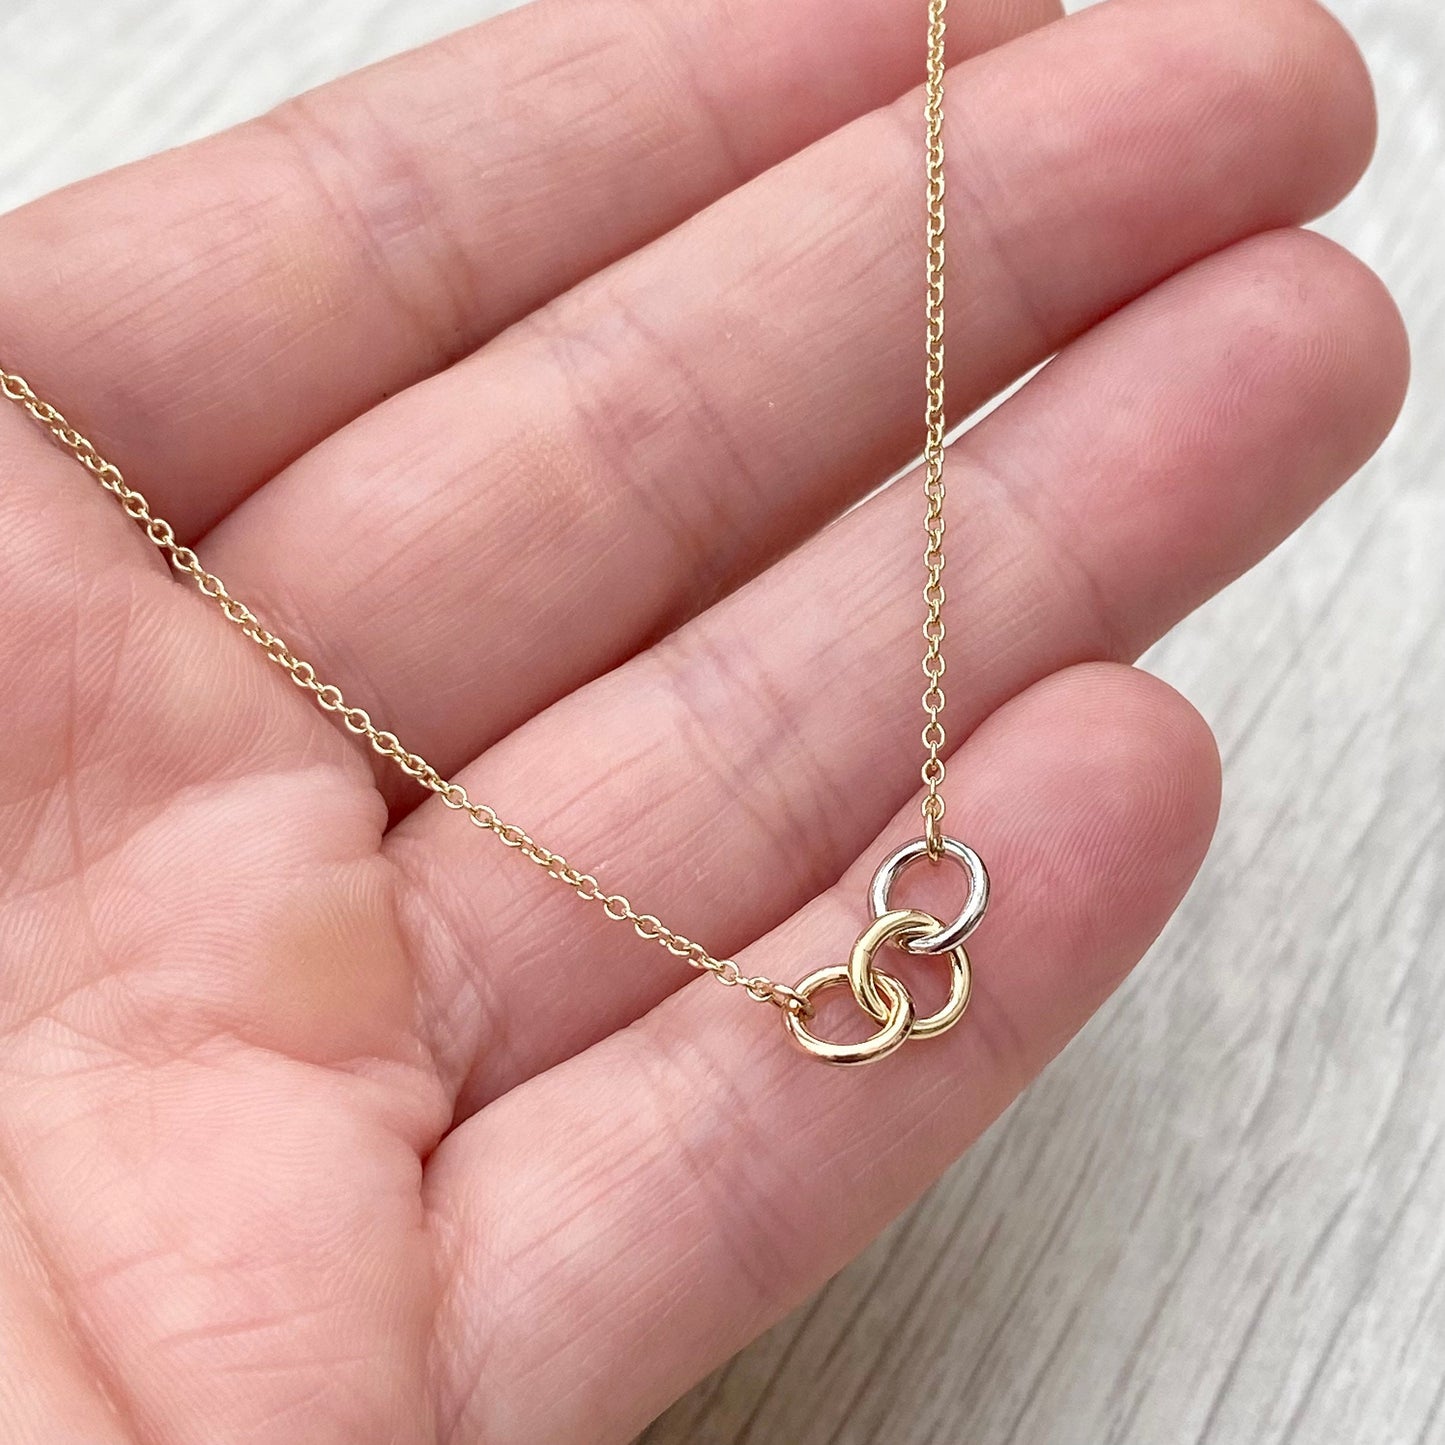 9ct solid yellow, white and rose gold three linked rings necklace with a 9ct yellow gold trace chain